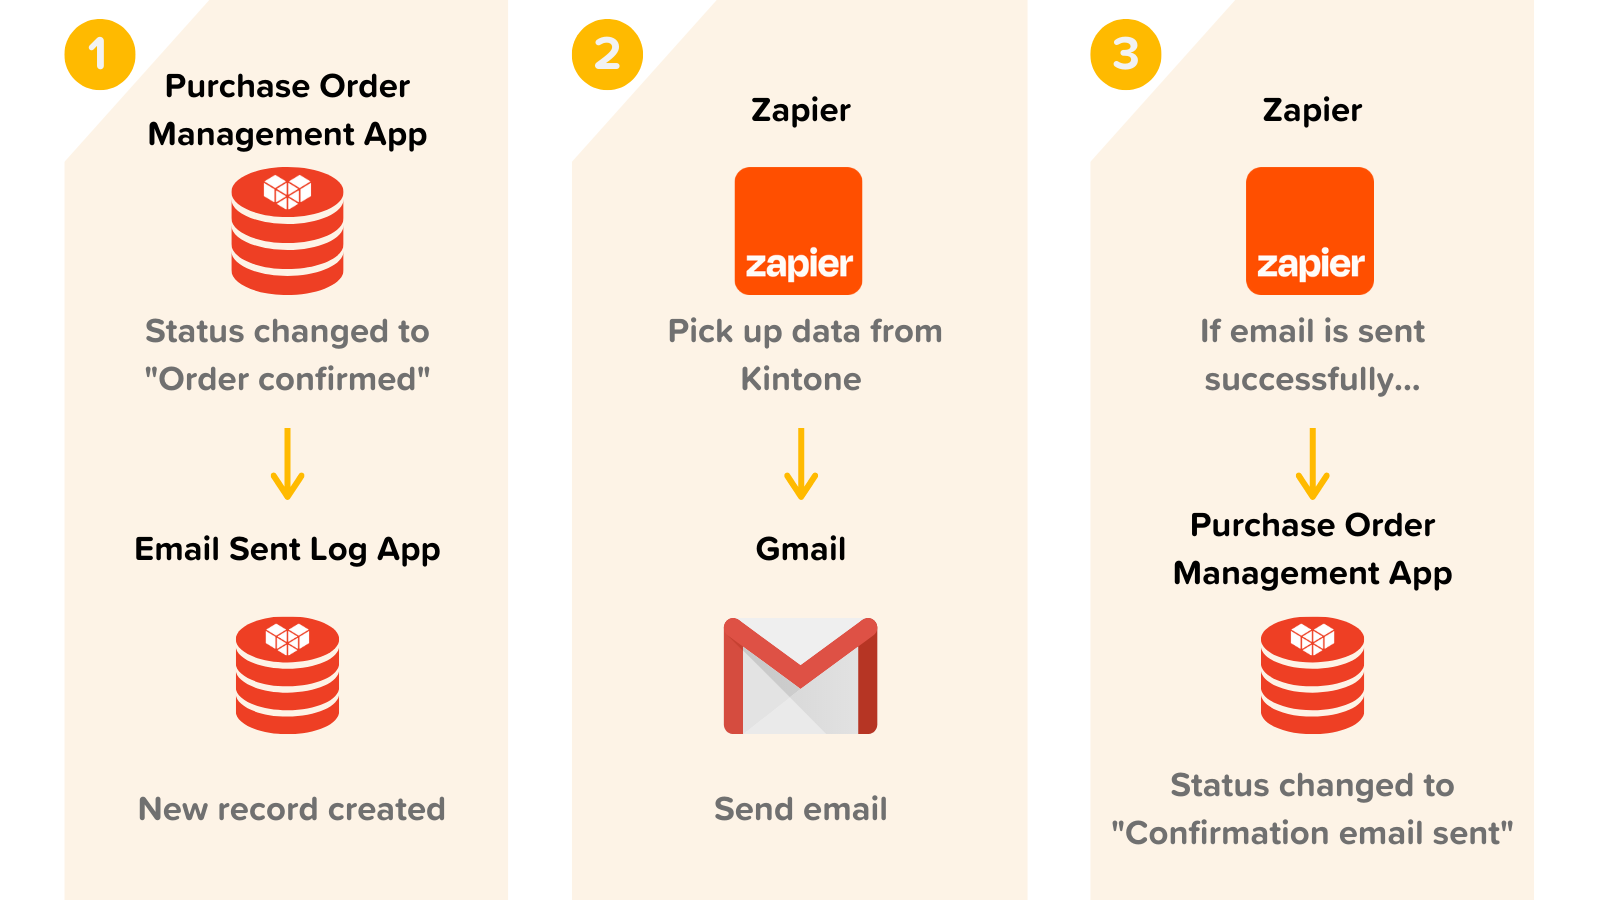 Image: The overall solution between Kintone, Zapier and Gmail.